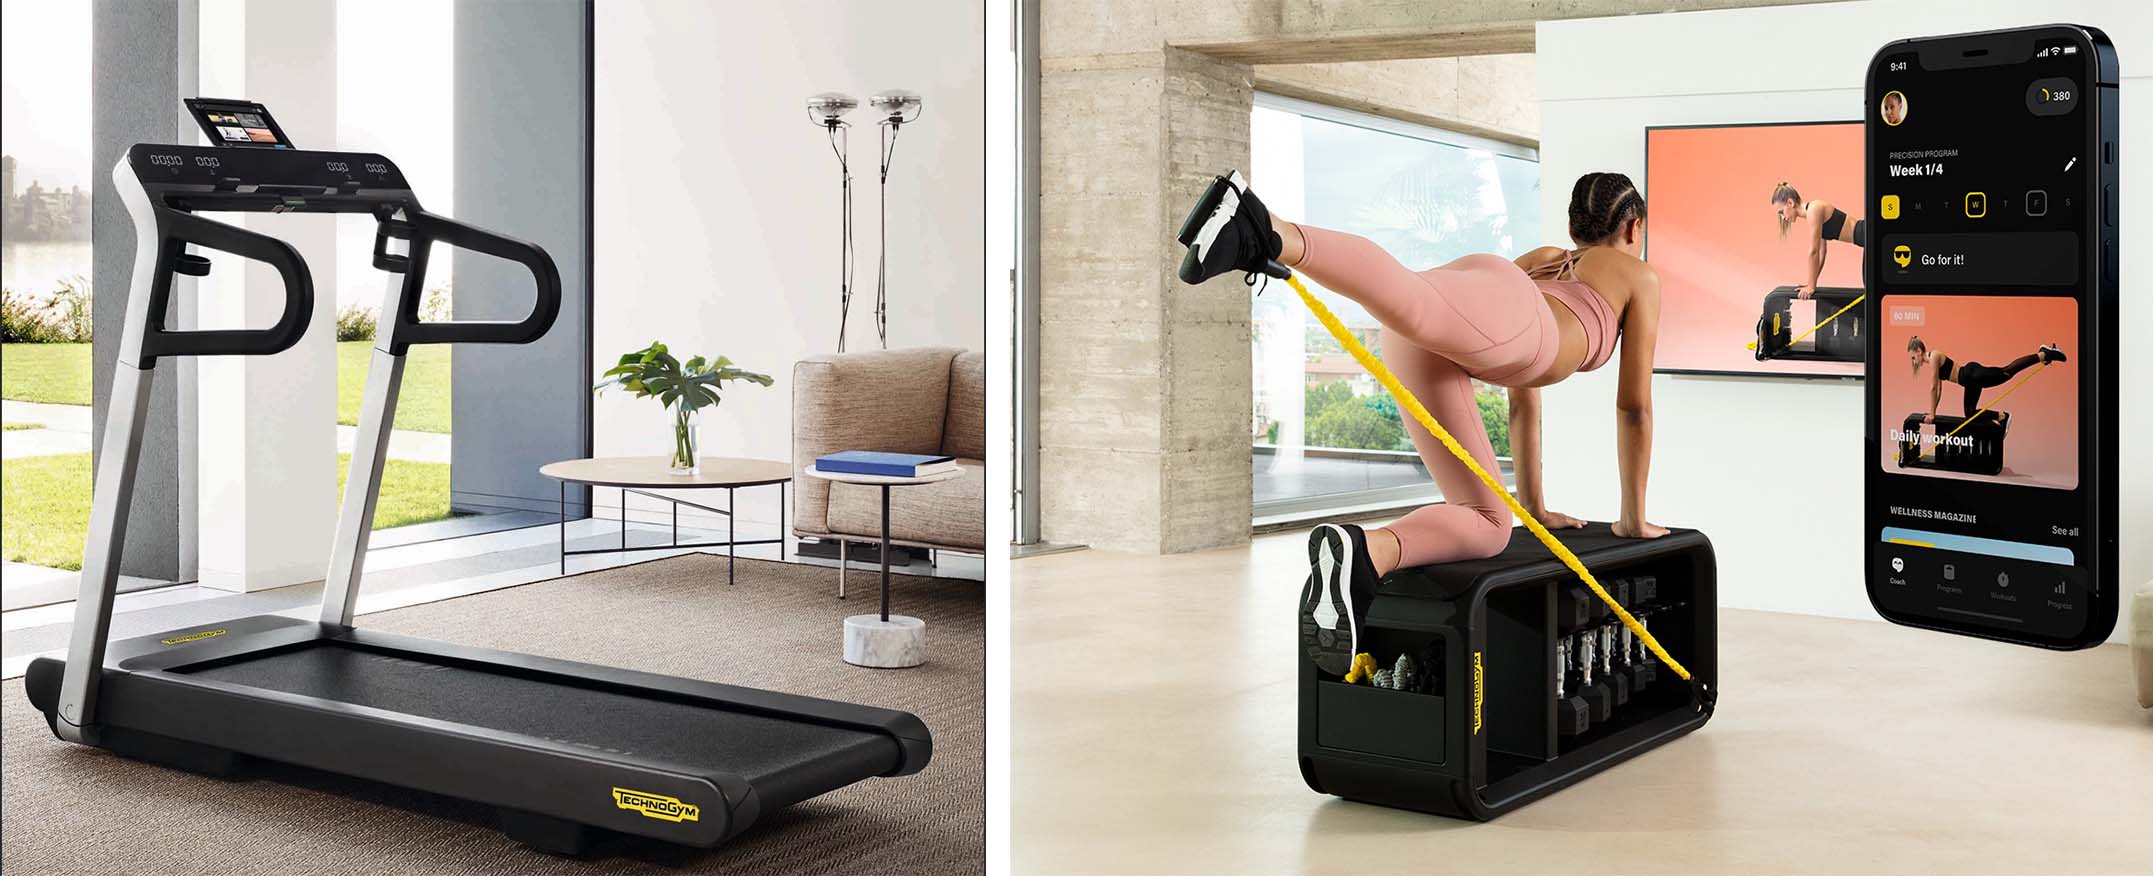 Say goodbye to dark and cold morning journeys with the latest tech from technogym